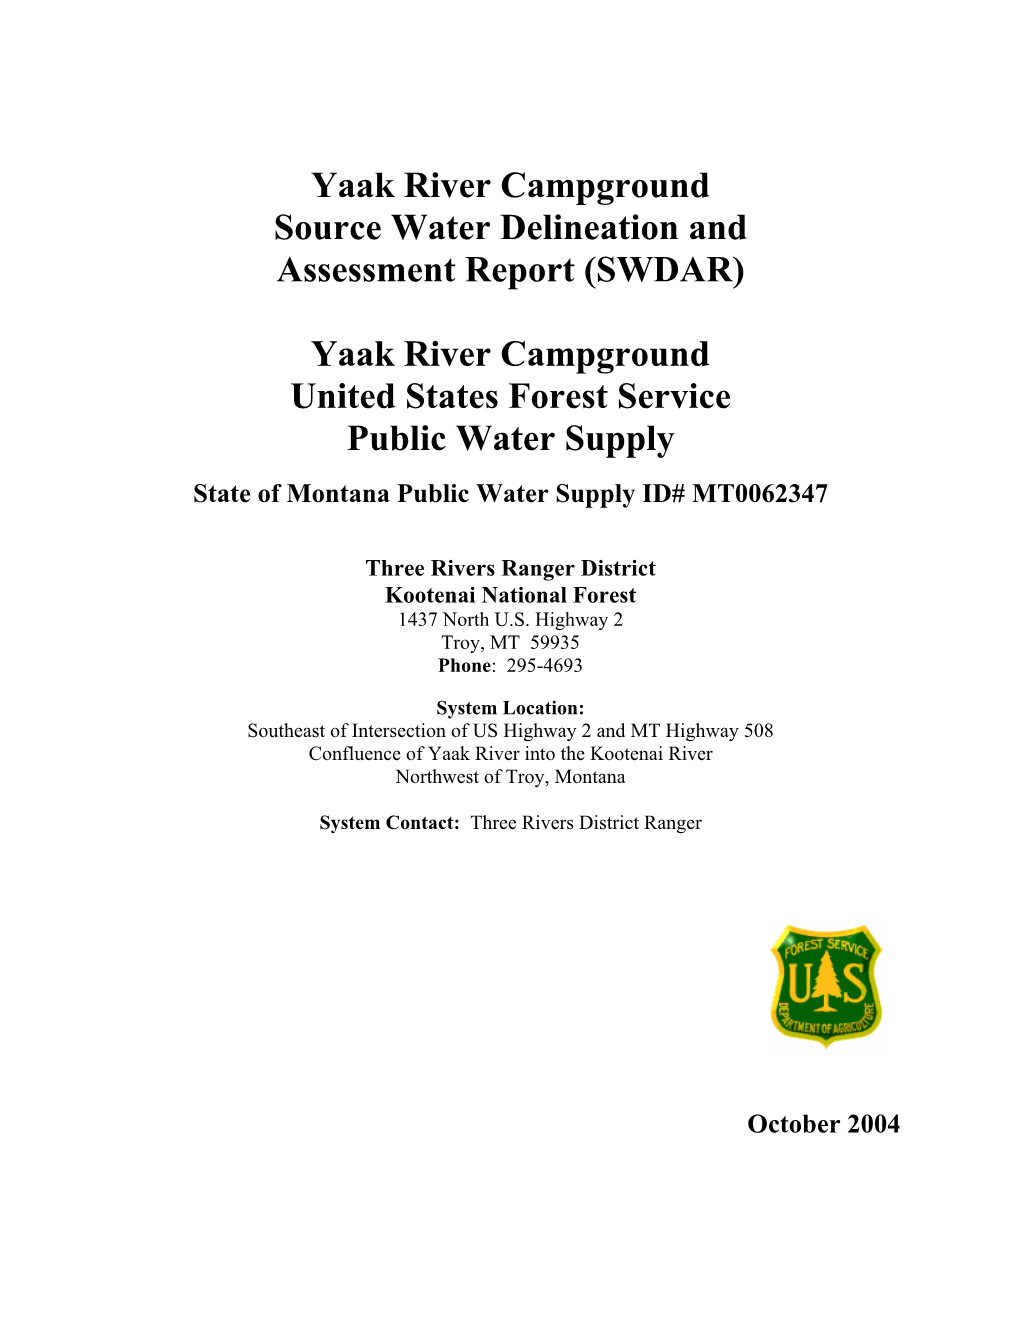 Yaak River Campground Source Water Delineation and Assessment Report (SWDAR)